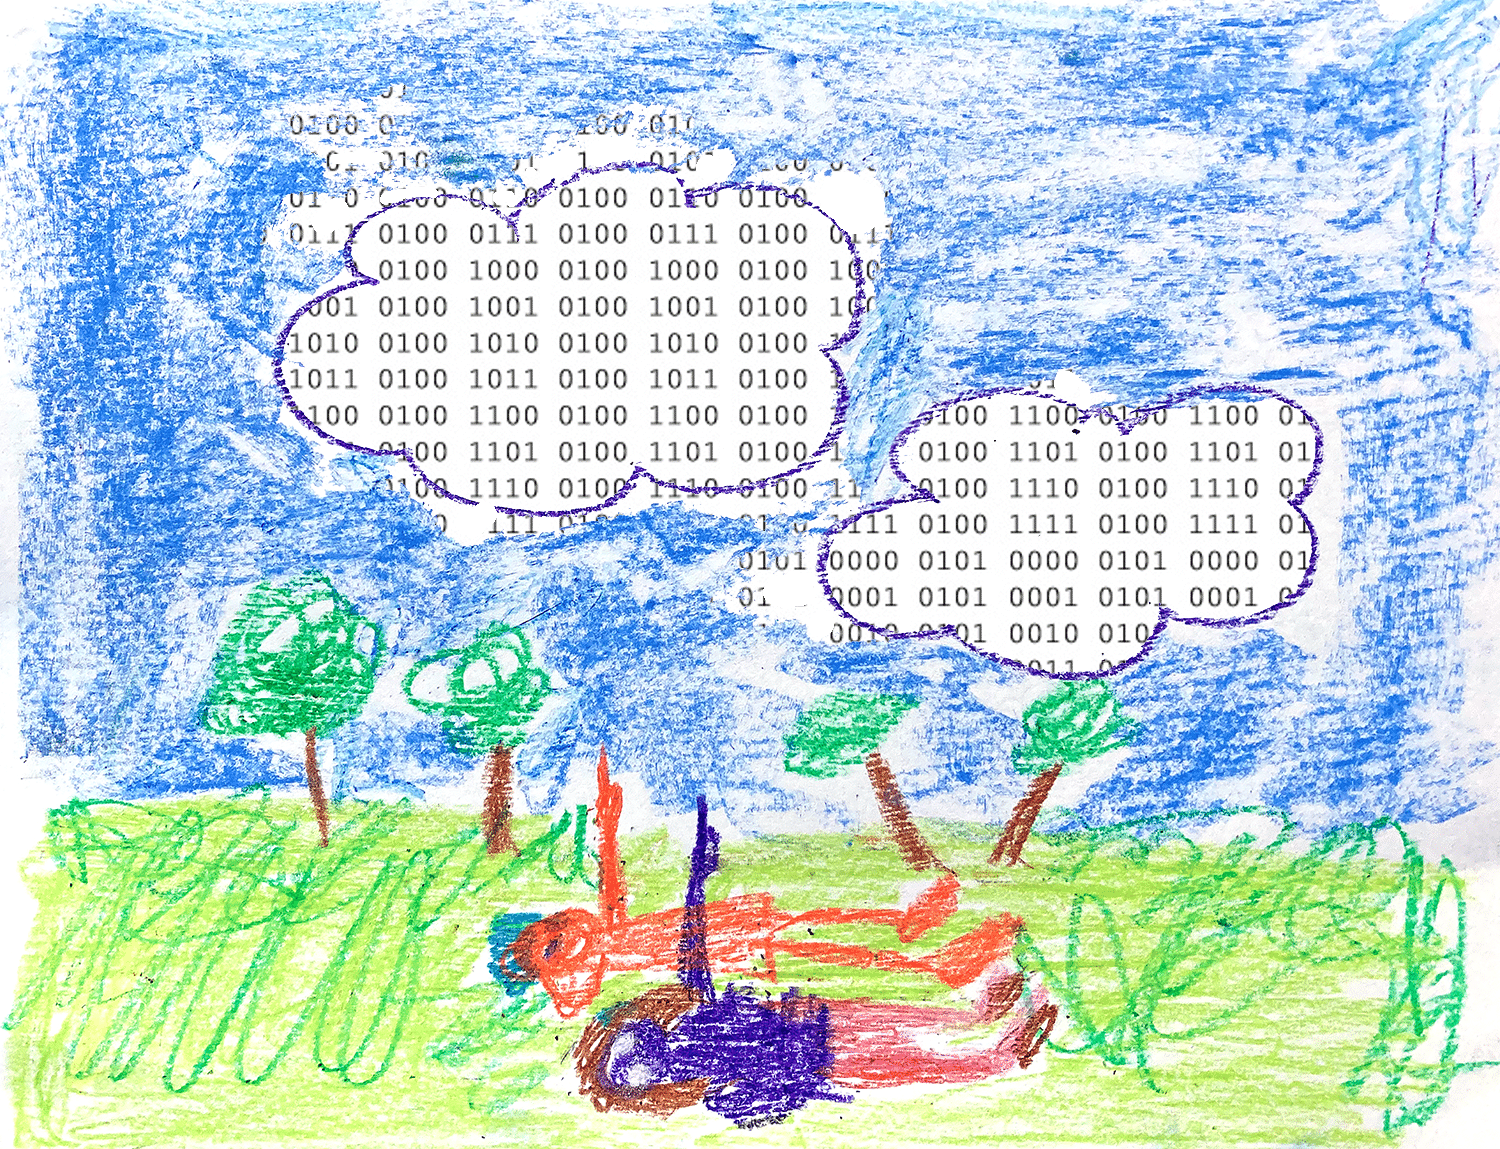 Crayon scribbled people lying on a grassy lawn, pointing toward clouds in the sky. The clouds are filled with binary code.